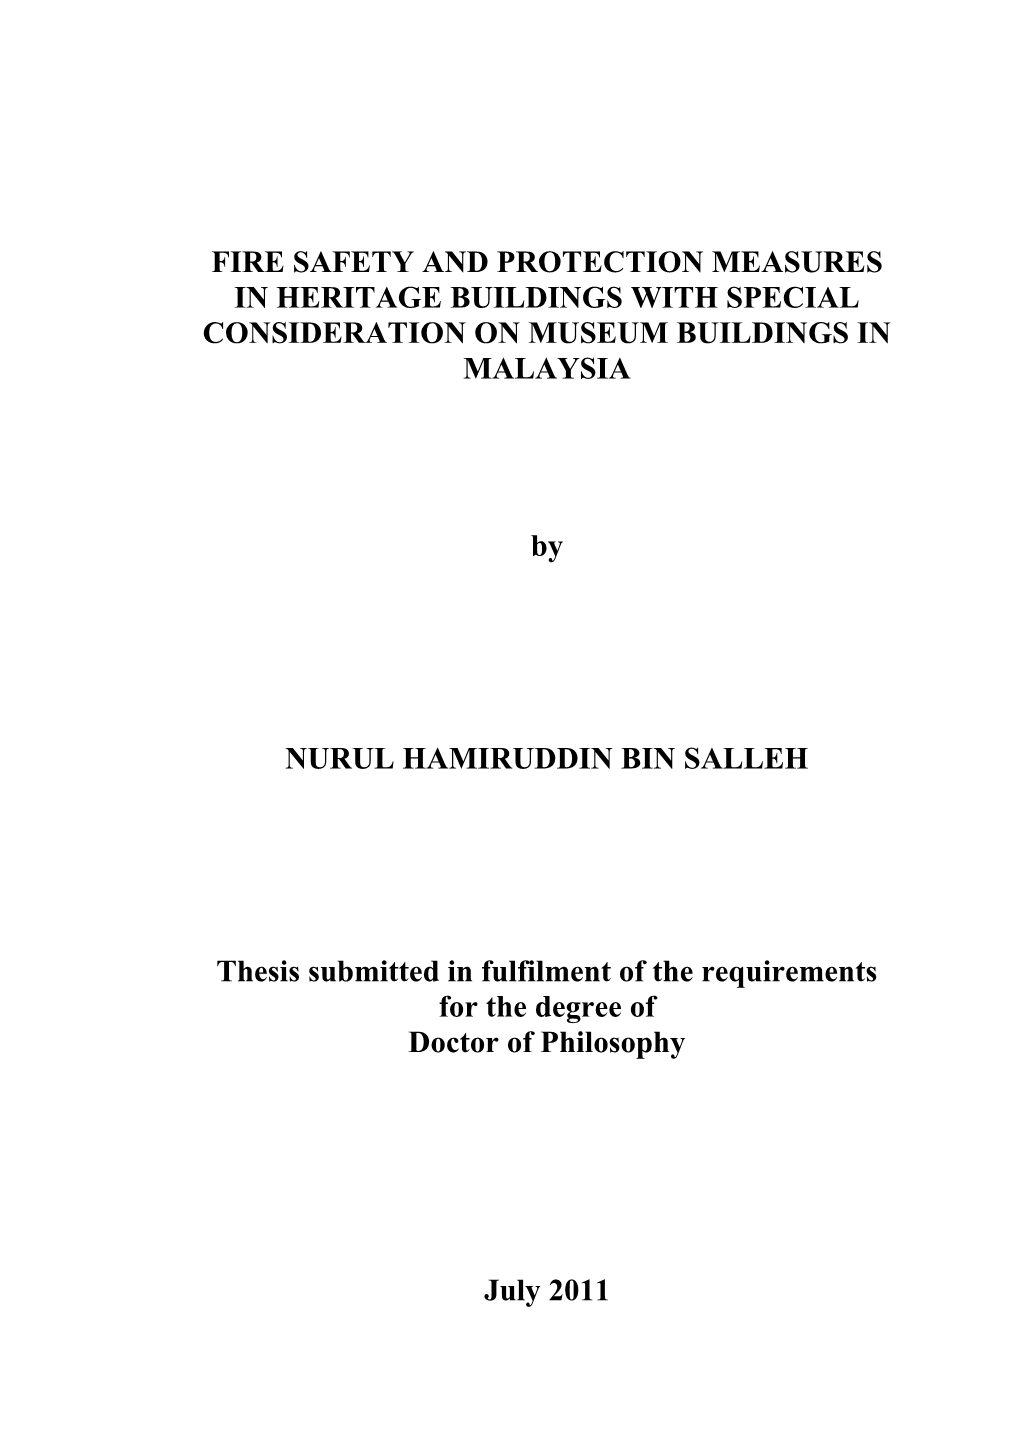 Fire Safety Management in Historic Buildings: a Case Study in Malaysia